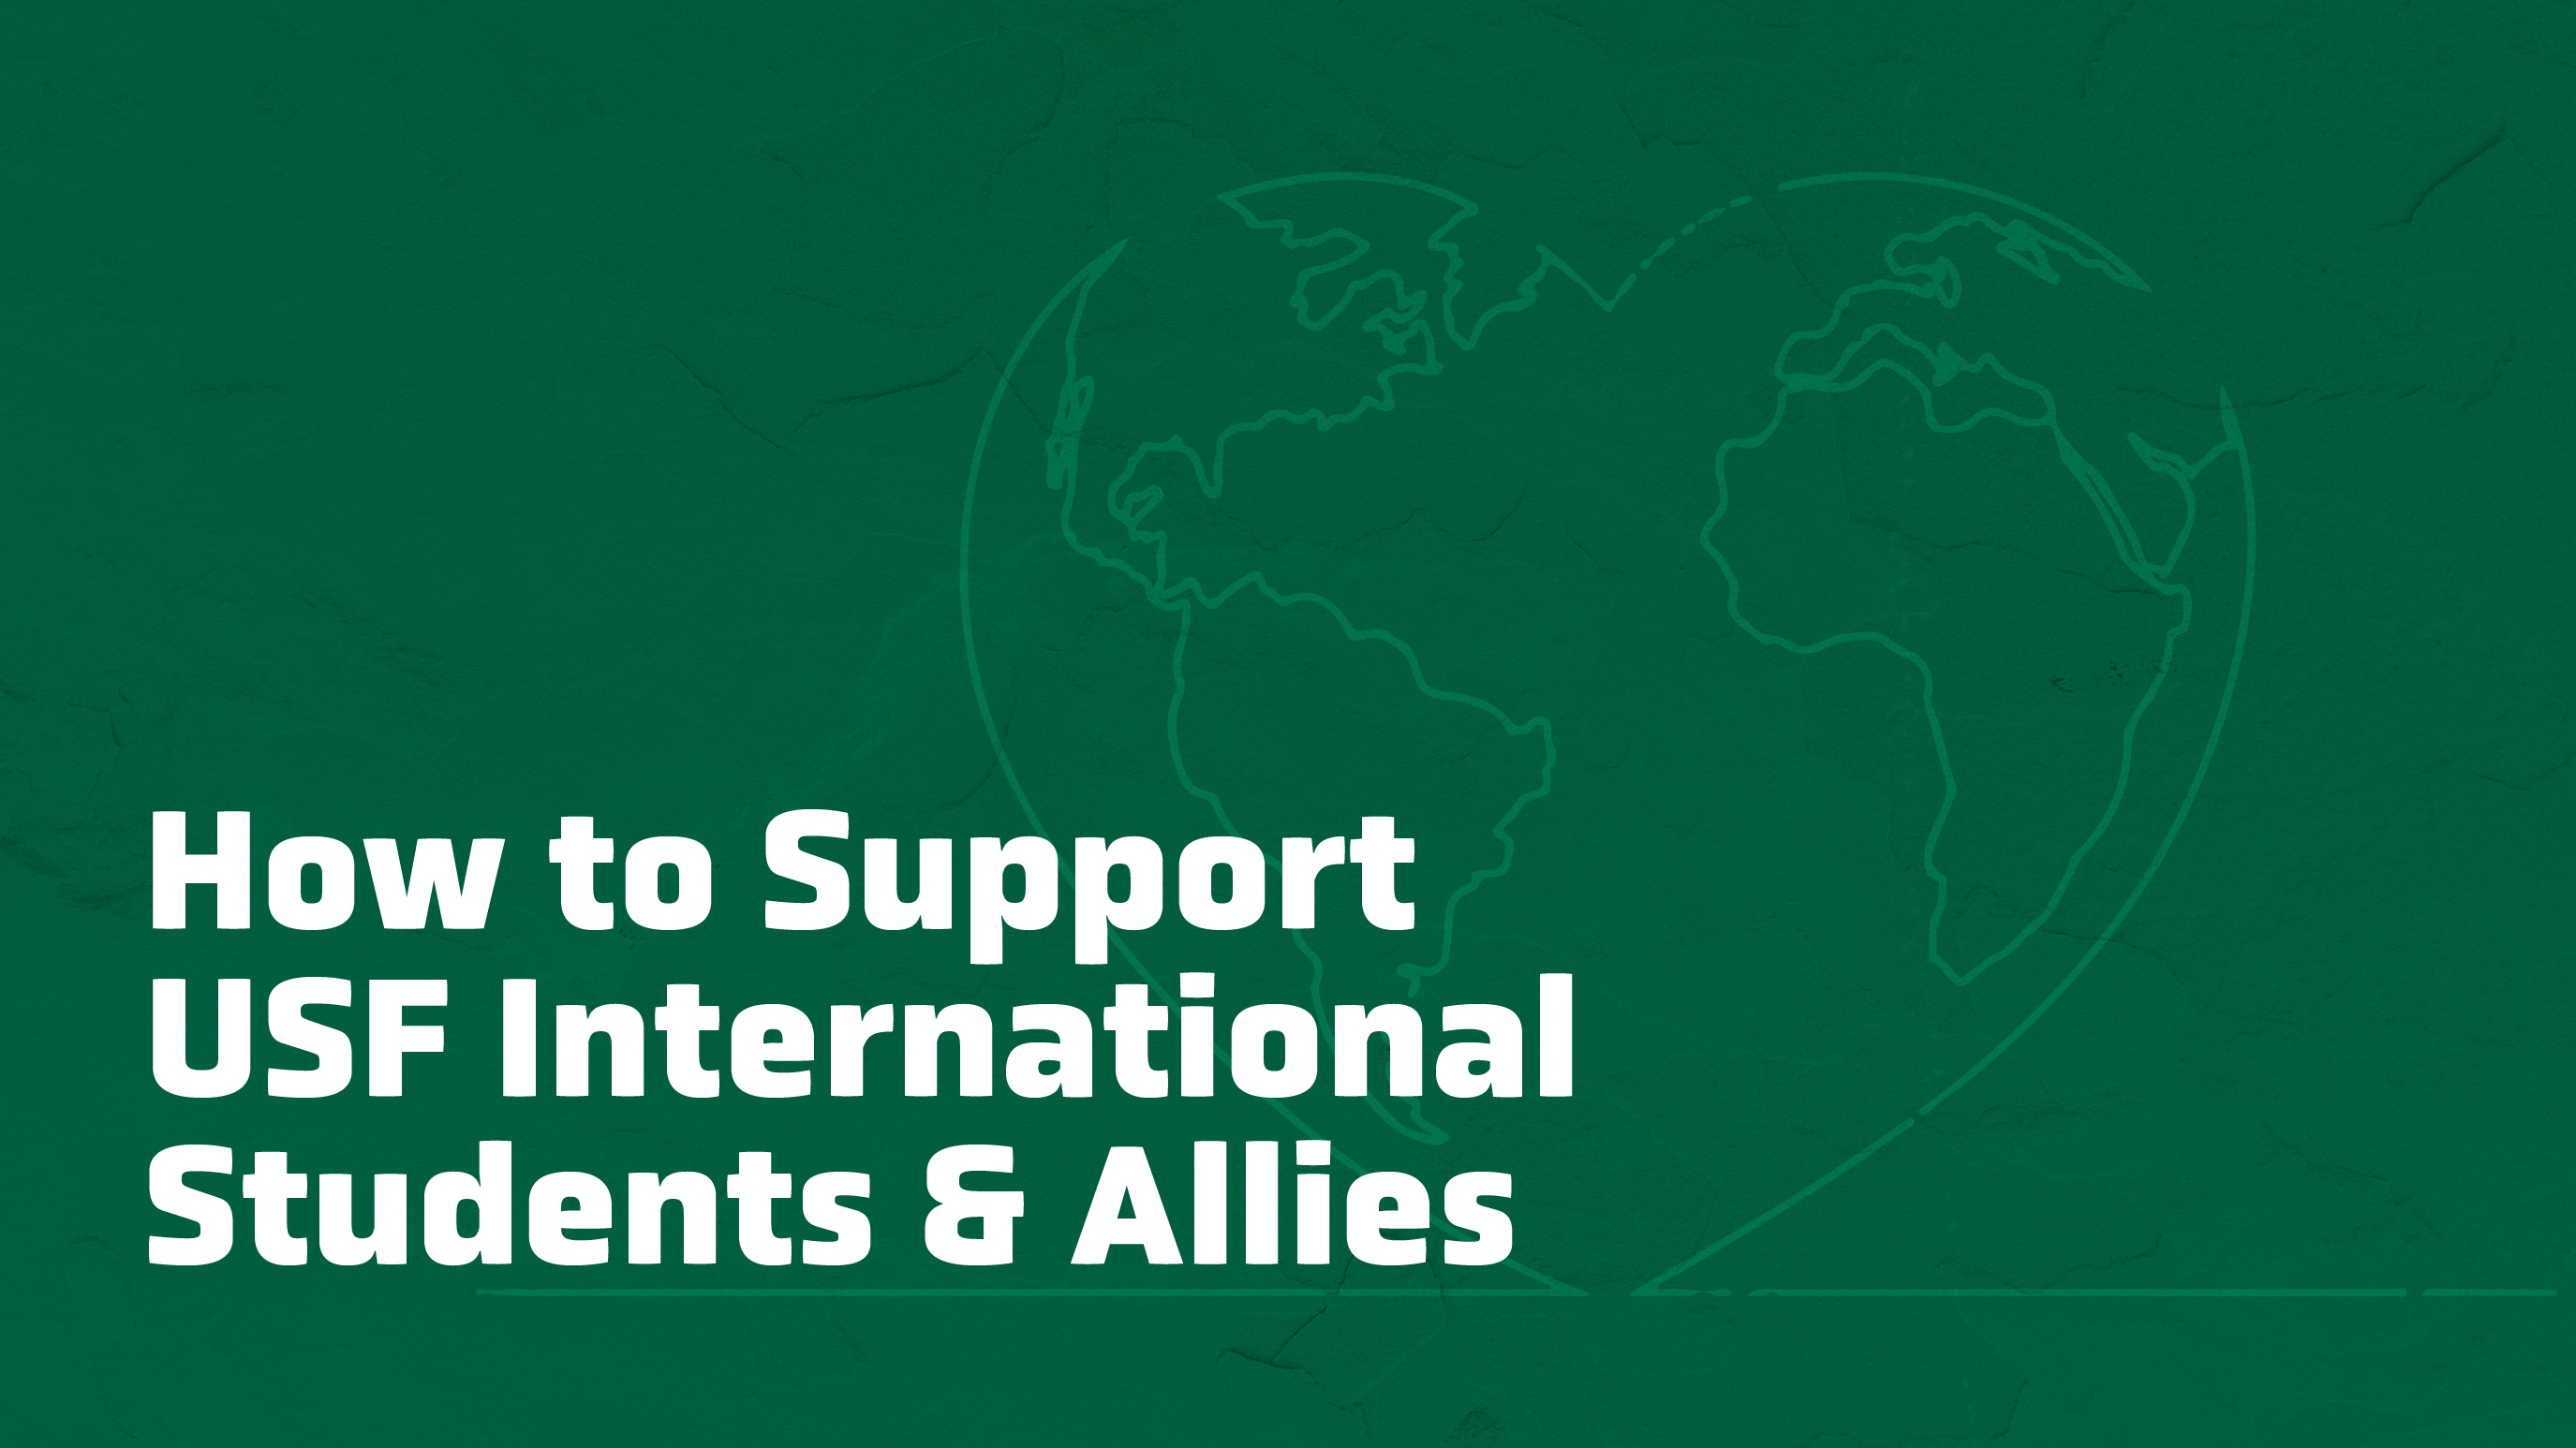 green background with heart-shaped globe and message "how to support USF international students & allies"